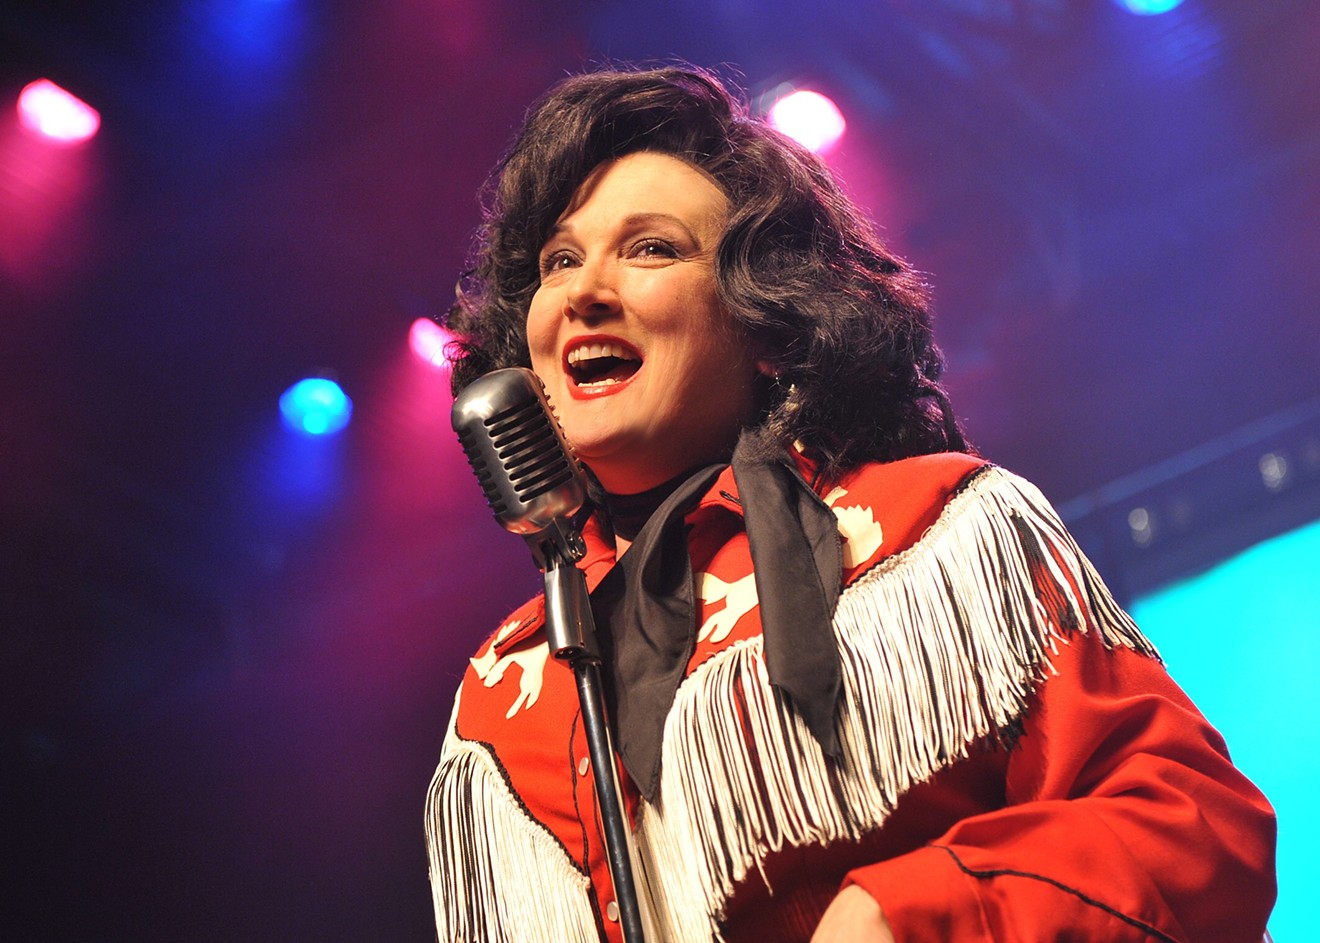 Julie Johnson plays Patsy Cline in the Brick Road Theatre production.